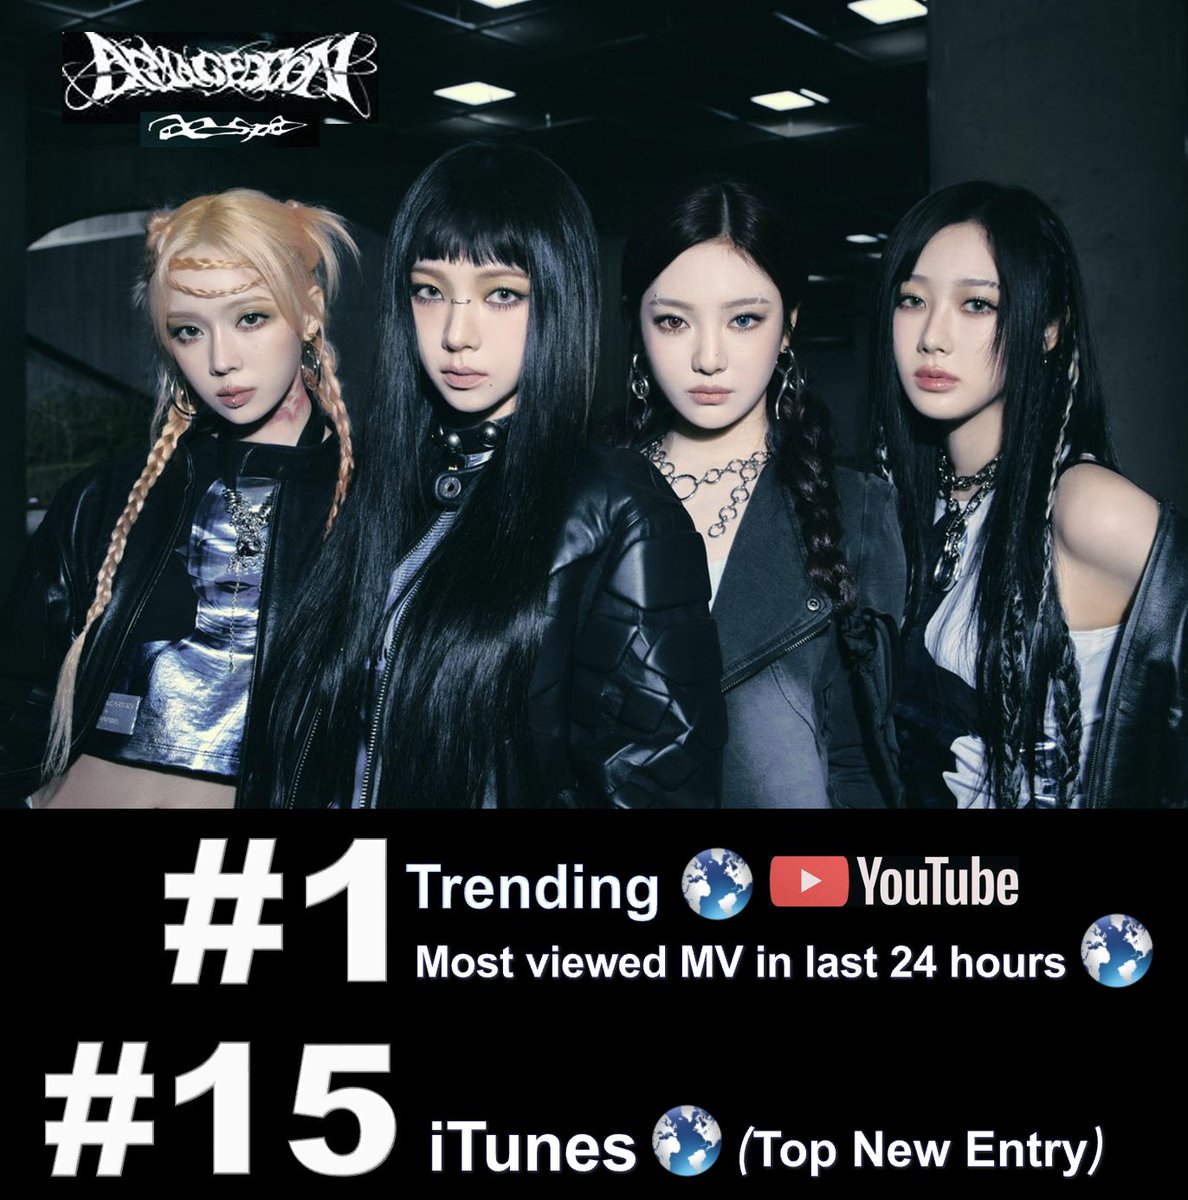 aespa are back with a huge Bang, scoring the Top New entry on the Worldwide & European iTunes Album charts with their amazing 1st Album 'Armageddon', landing at #1 & #4 respectively after debuting at #1 on US iTunes & 25 countries, and score the Top New Entry on the Worldwide